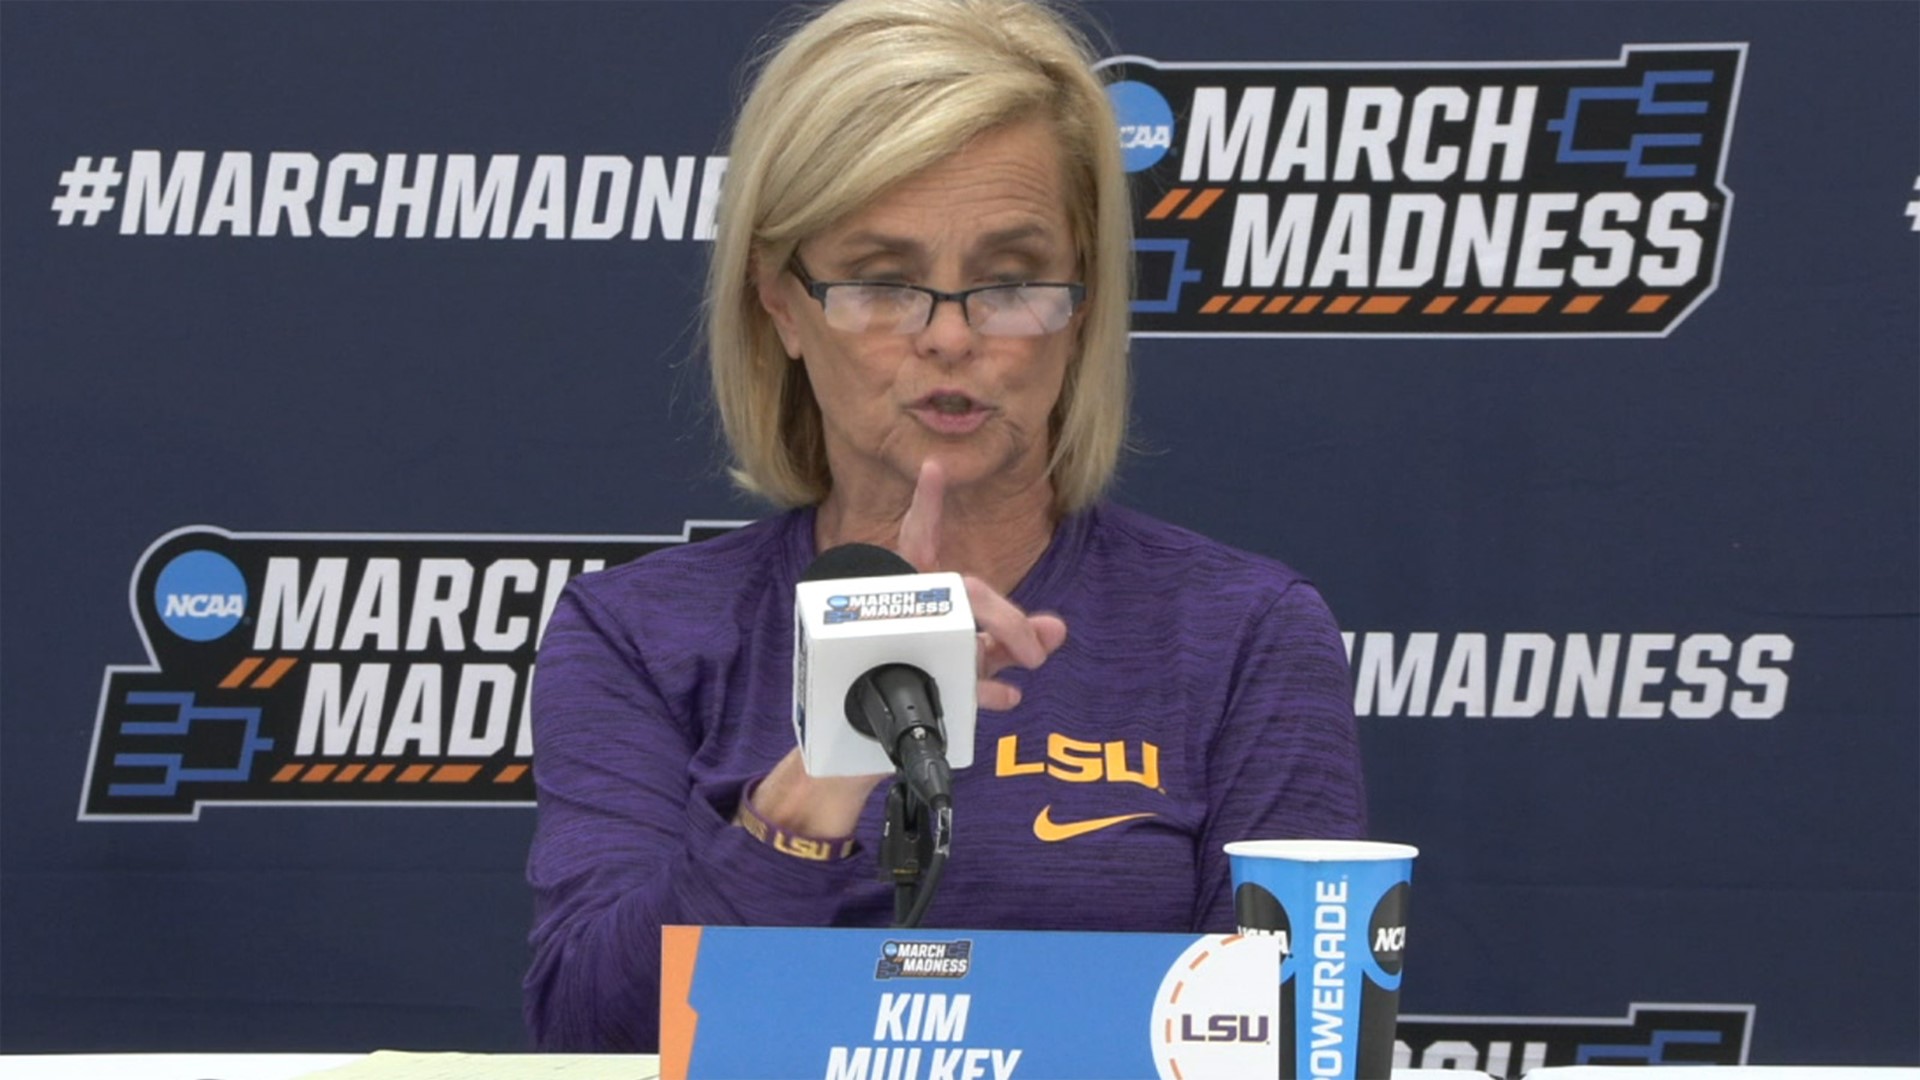 LSU's Kim Mulkey used the first two minutes of her NCAA tournament pre-game press conference to blast an expected article on her in the Washington Post.